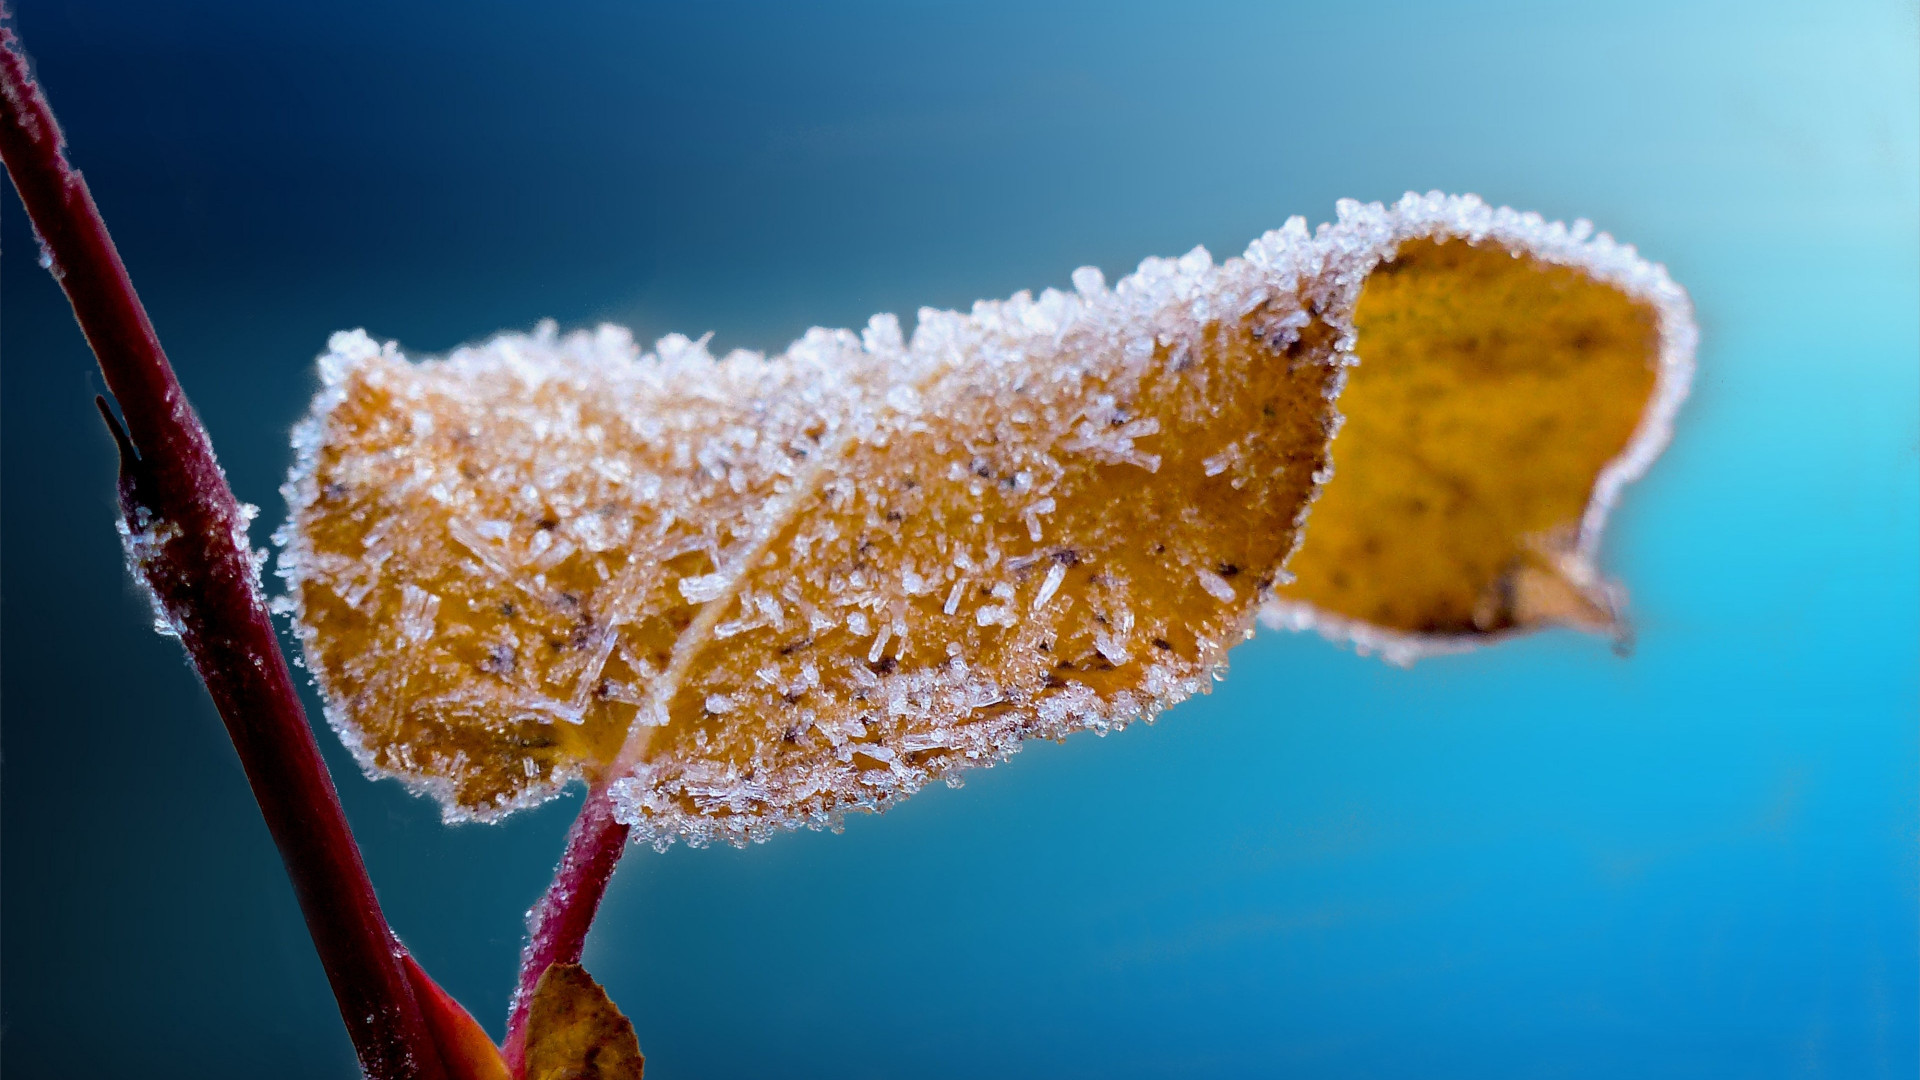 Frosted leaf wallpaper 1920x1080